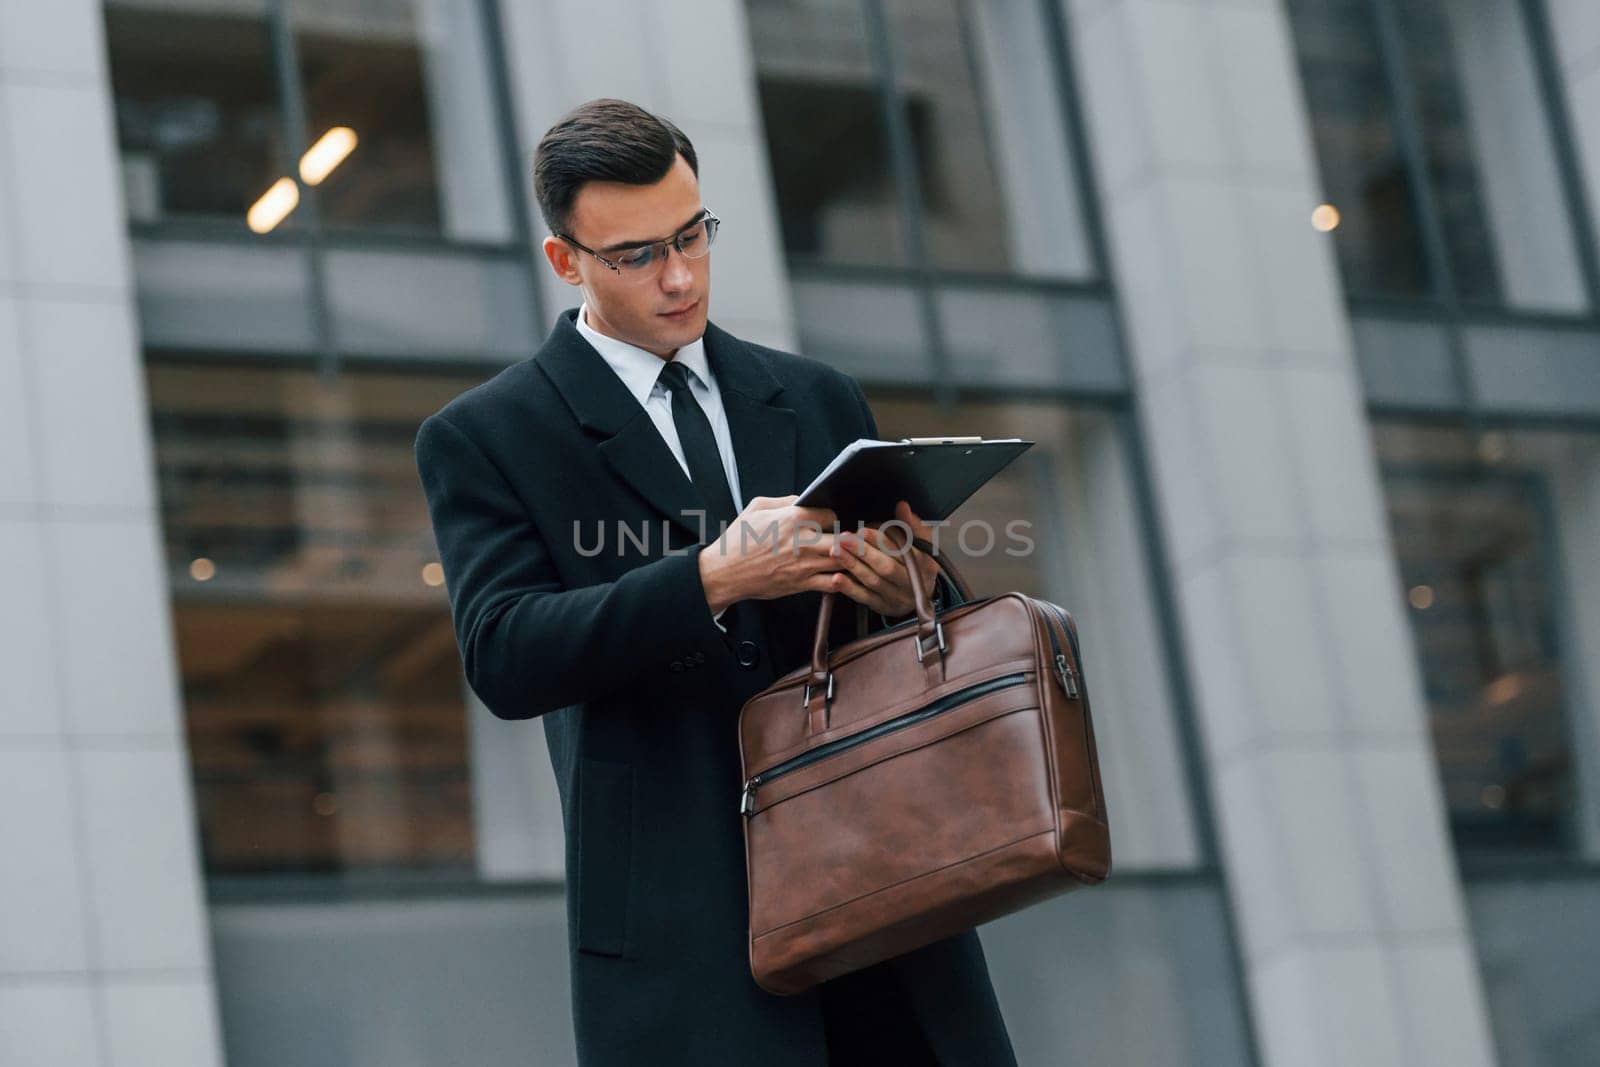 With brown bag. Businessman in black suit and tie is outdoors in the city.